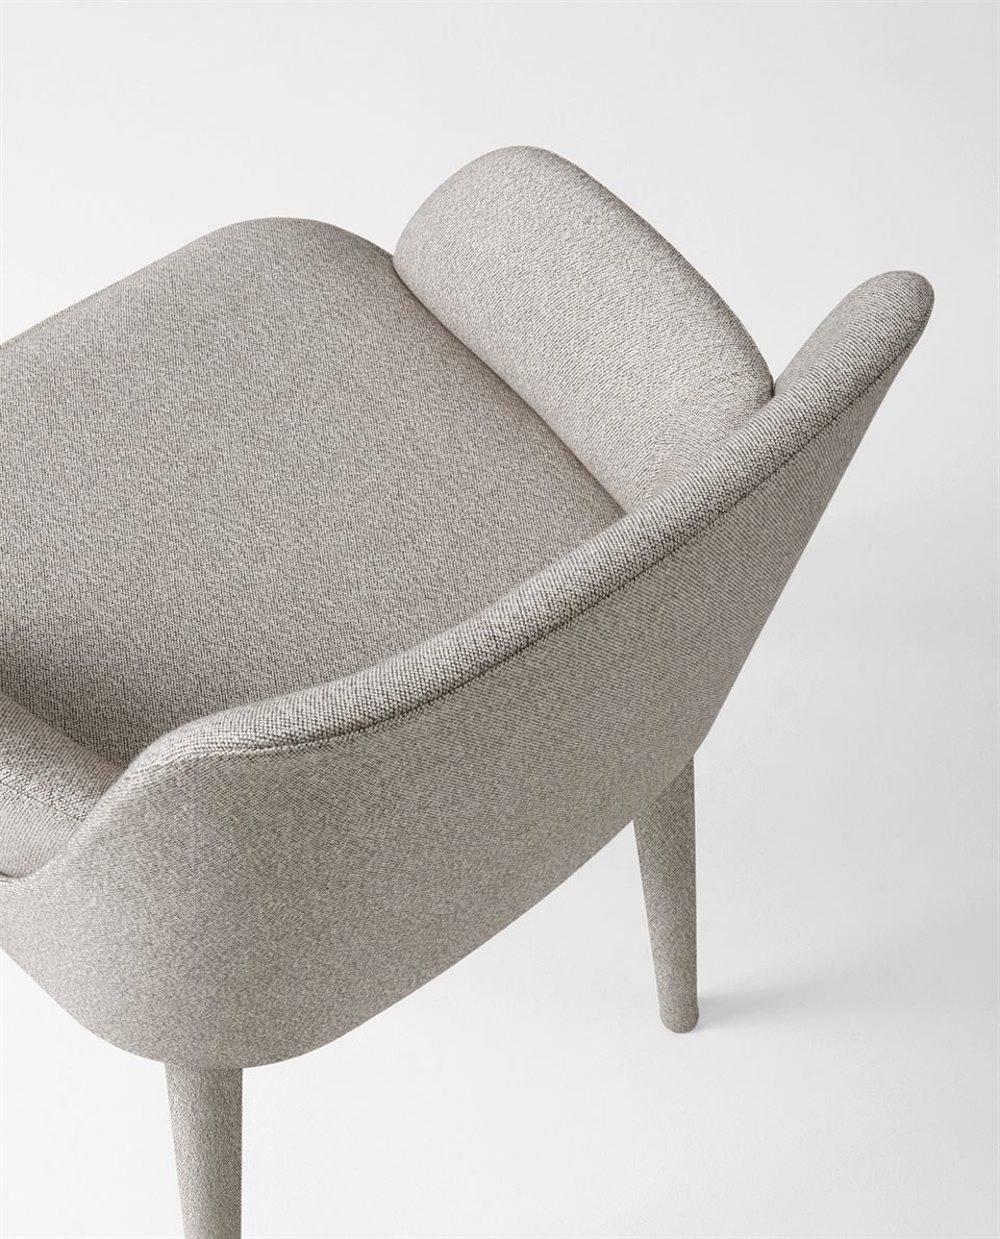 Upholstered armchair or chair completely covered with fabric article Reggio or suede, choosing from our samples book. Seat and backrest covered by fabric or leather as per sample.
      